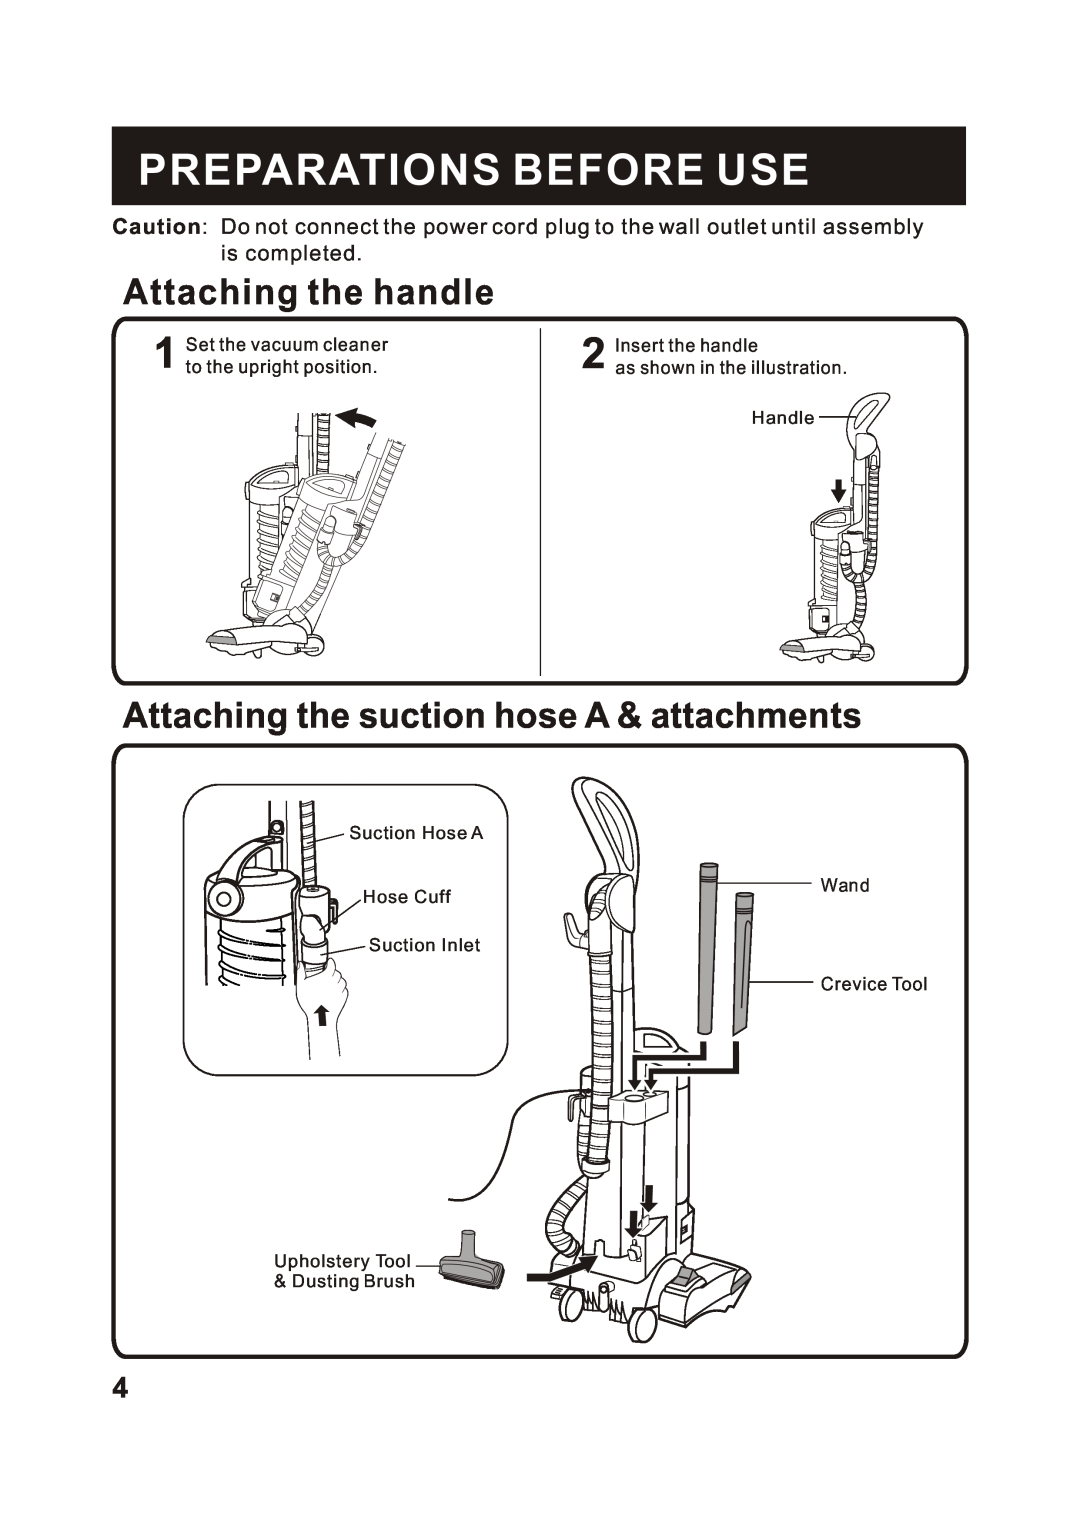 Fantom Vacuum FM655CS Preparations Before Use, Attaching the handle, Attaching the suction hose A & attachments 